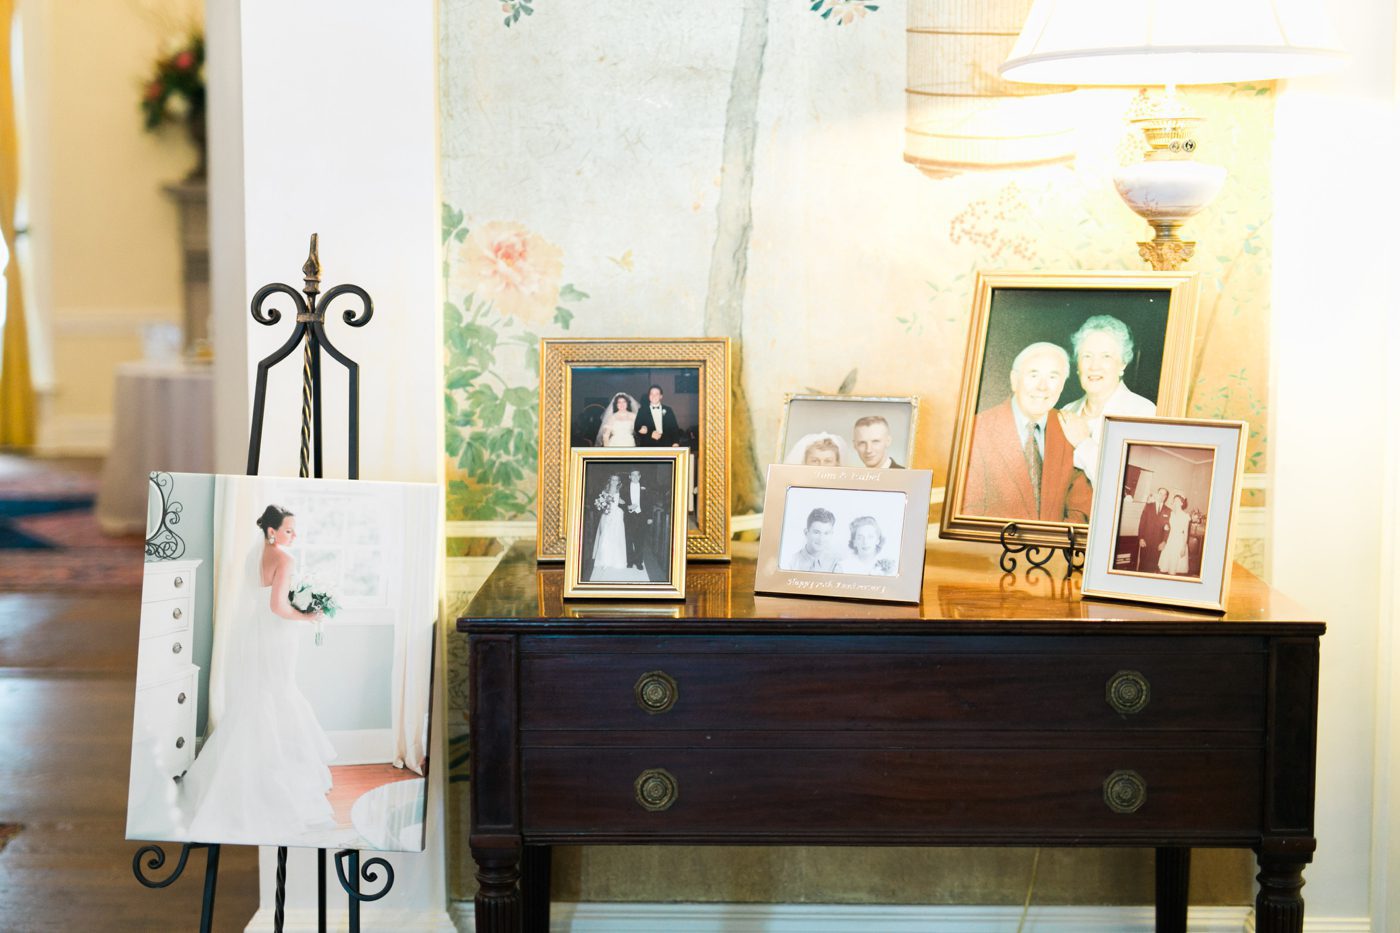 Vintage wedding photo table at a southern wedding. Photo by Charleston wedding photographer Catherine Ann Photography